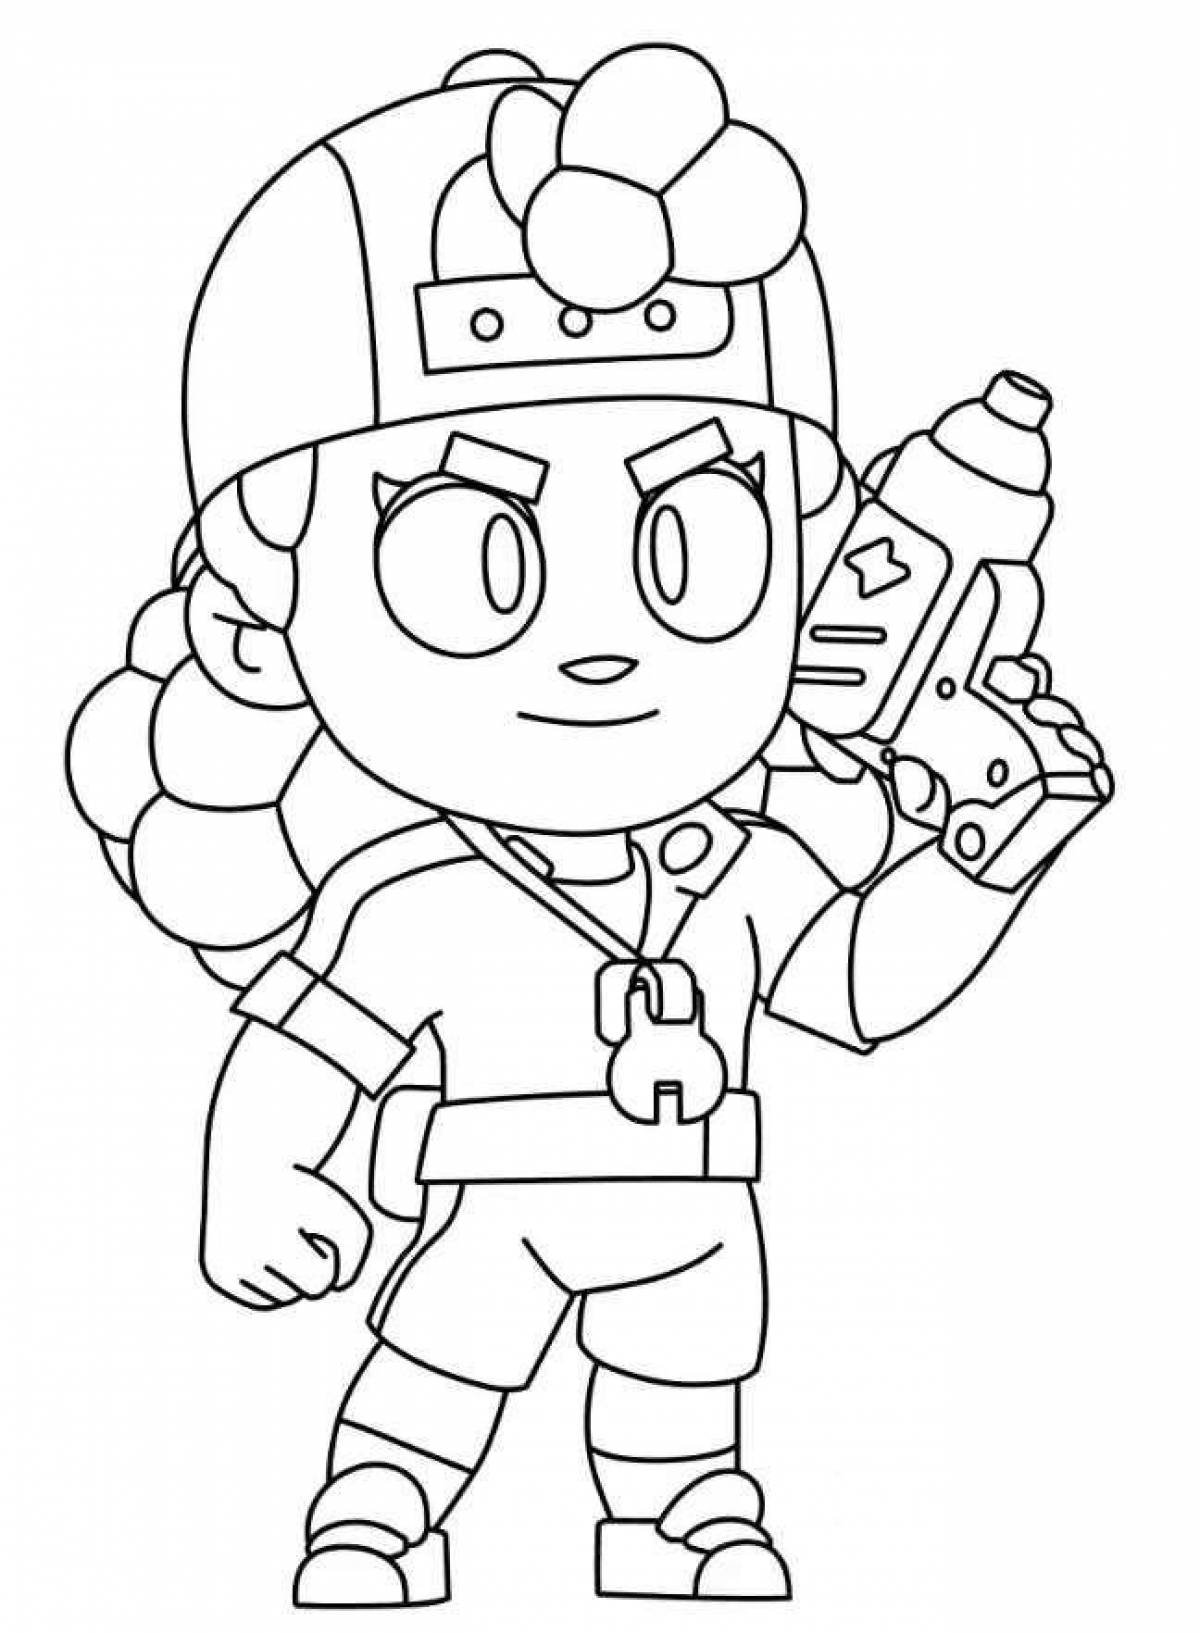 Coloring page charming shelly bravo stars